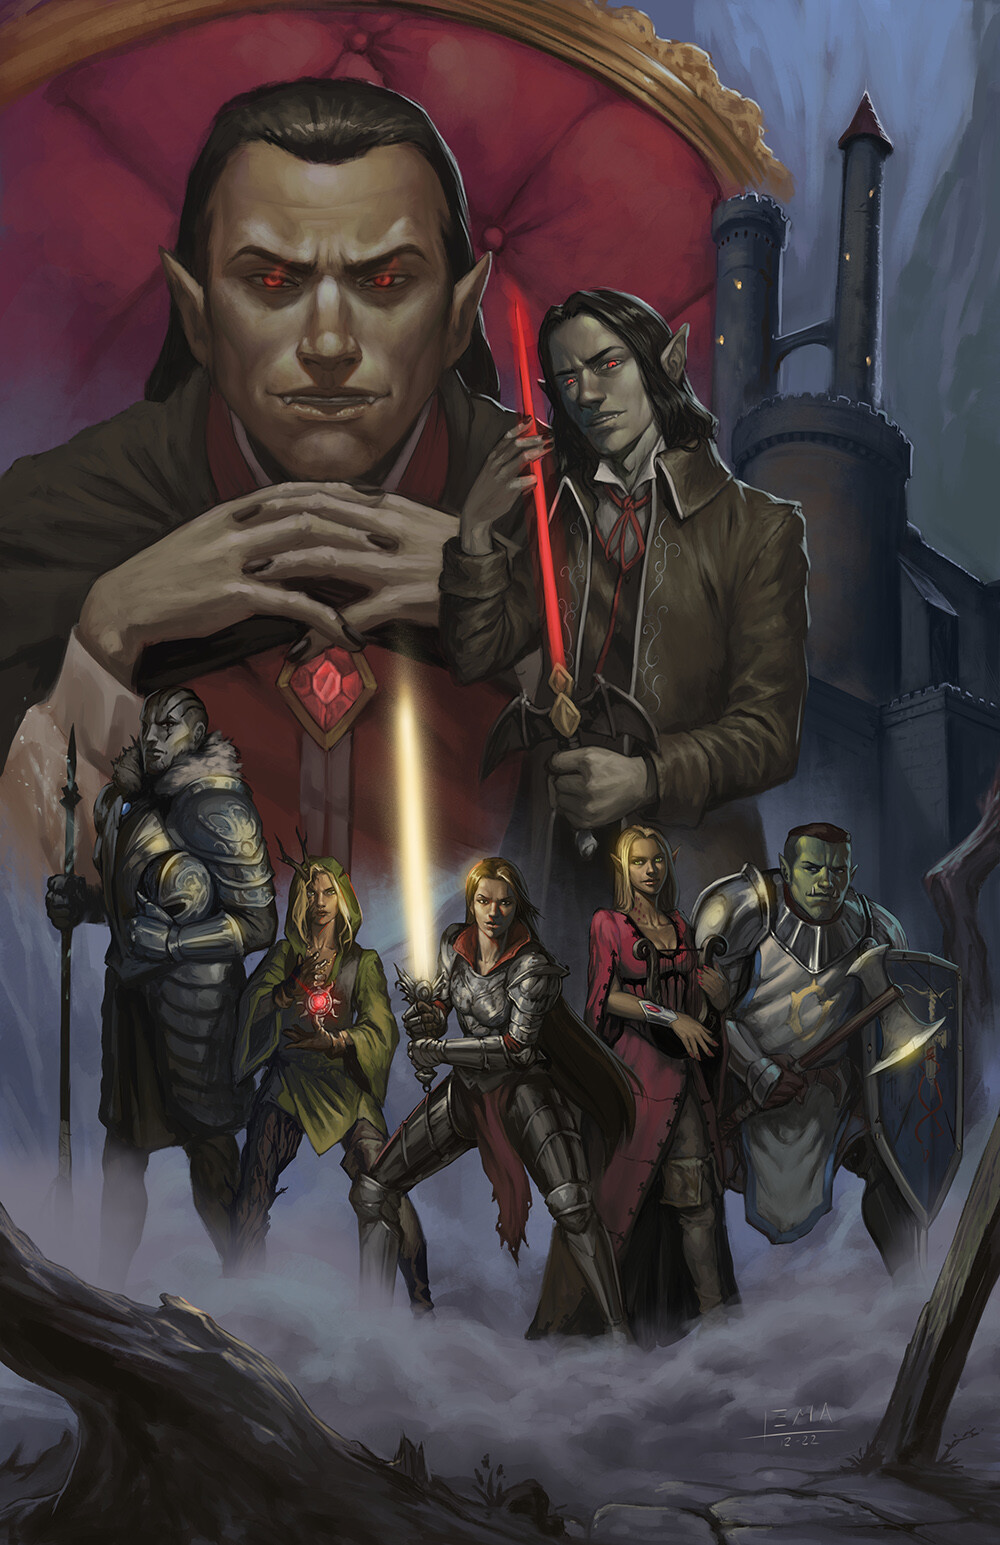 Art] Curse of strahd Group commission : r/DnD